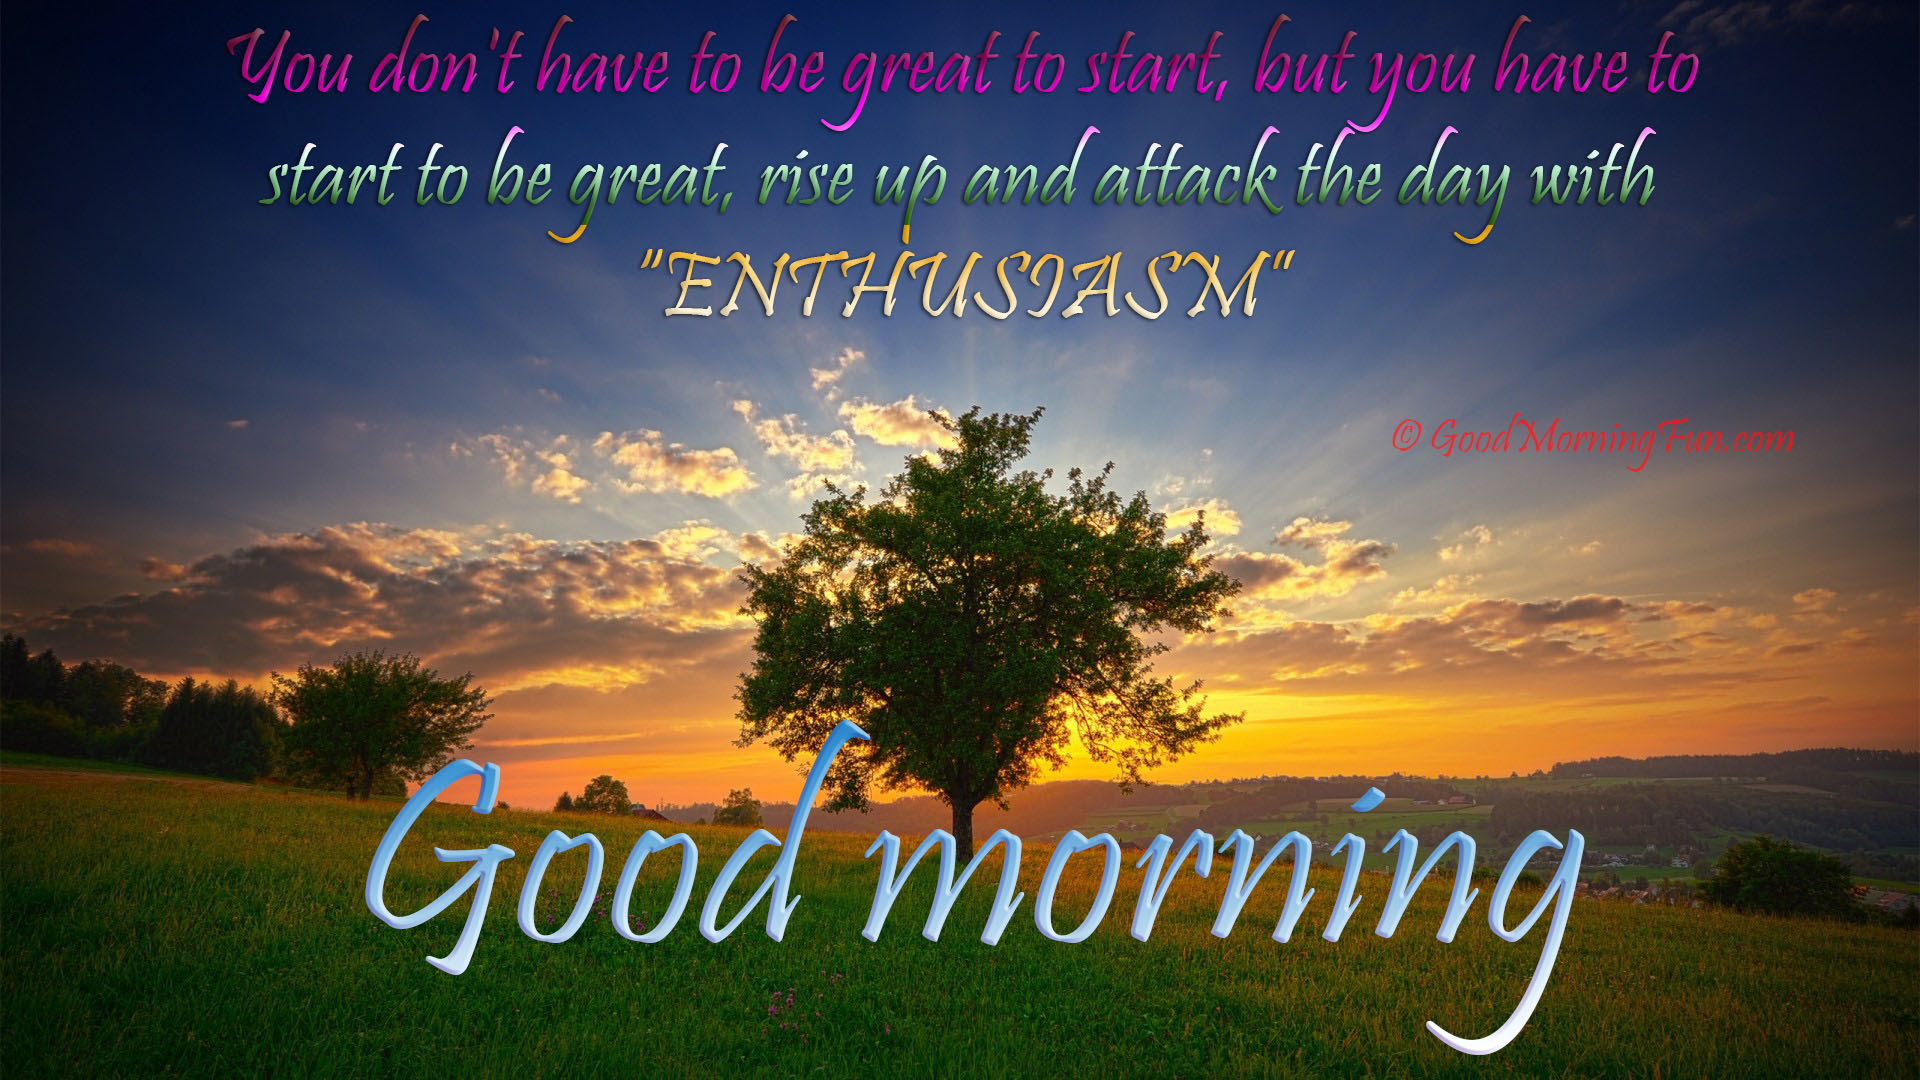 Good Morning Quotes on Great Start Rise Up Enthusiasm